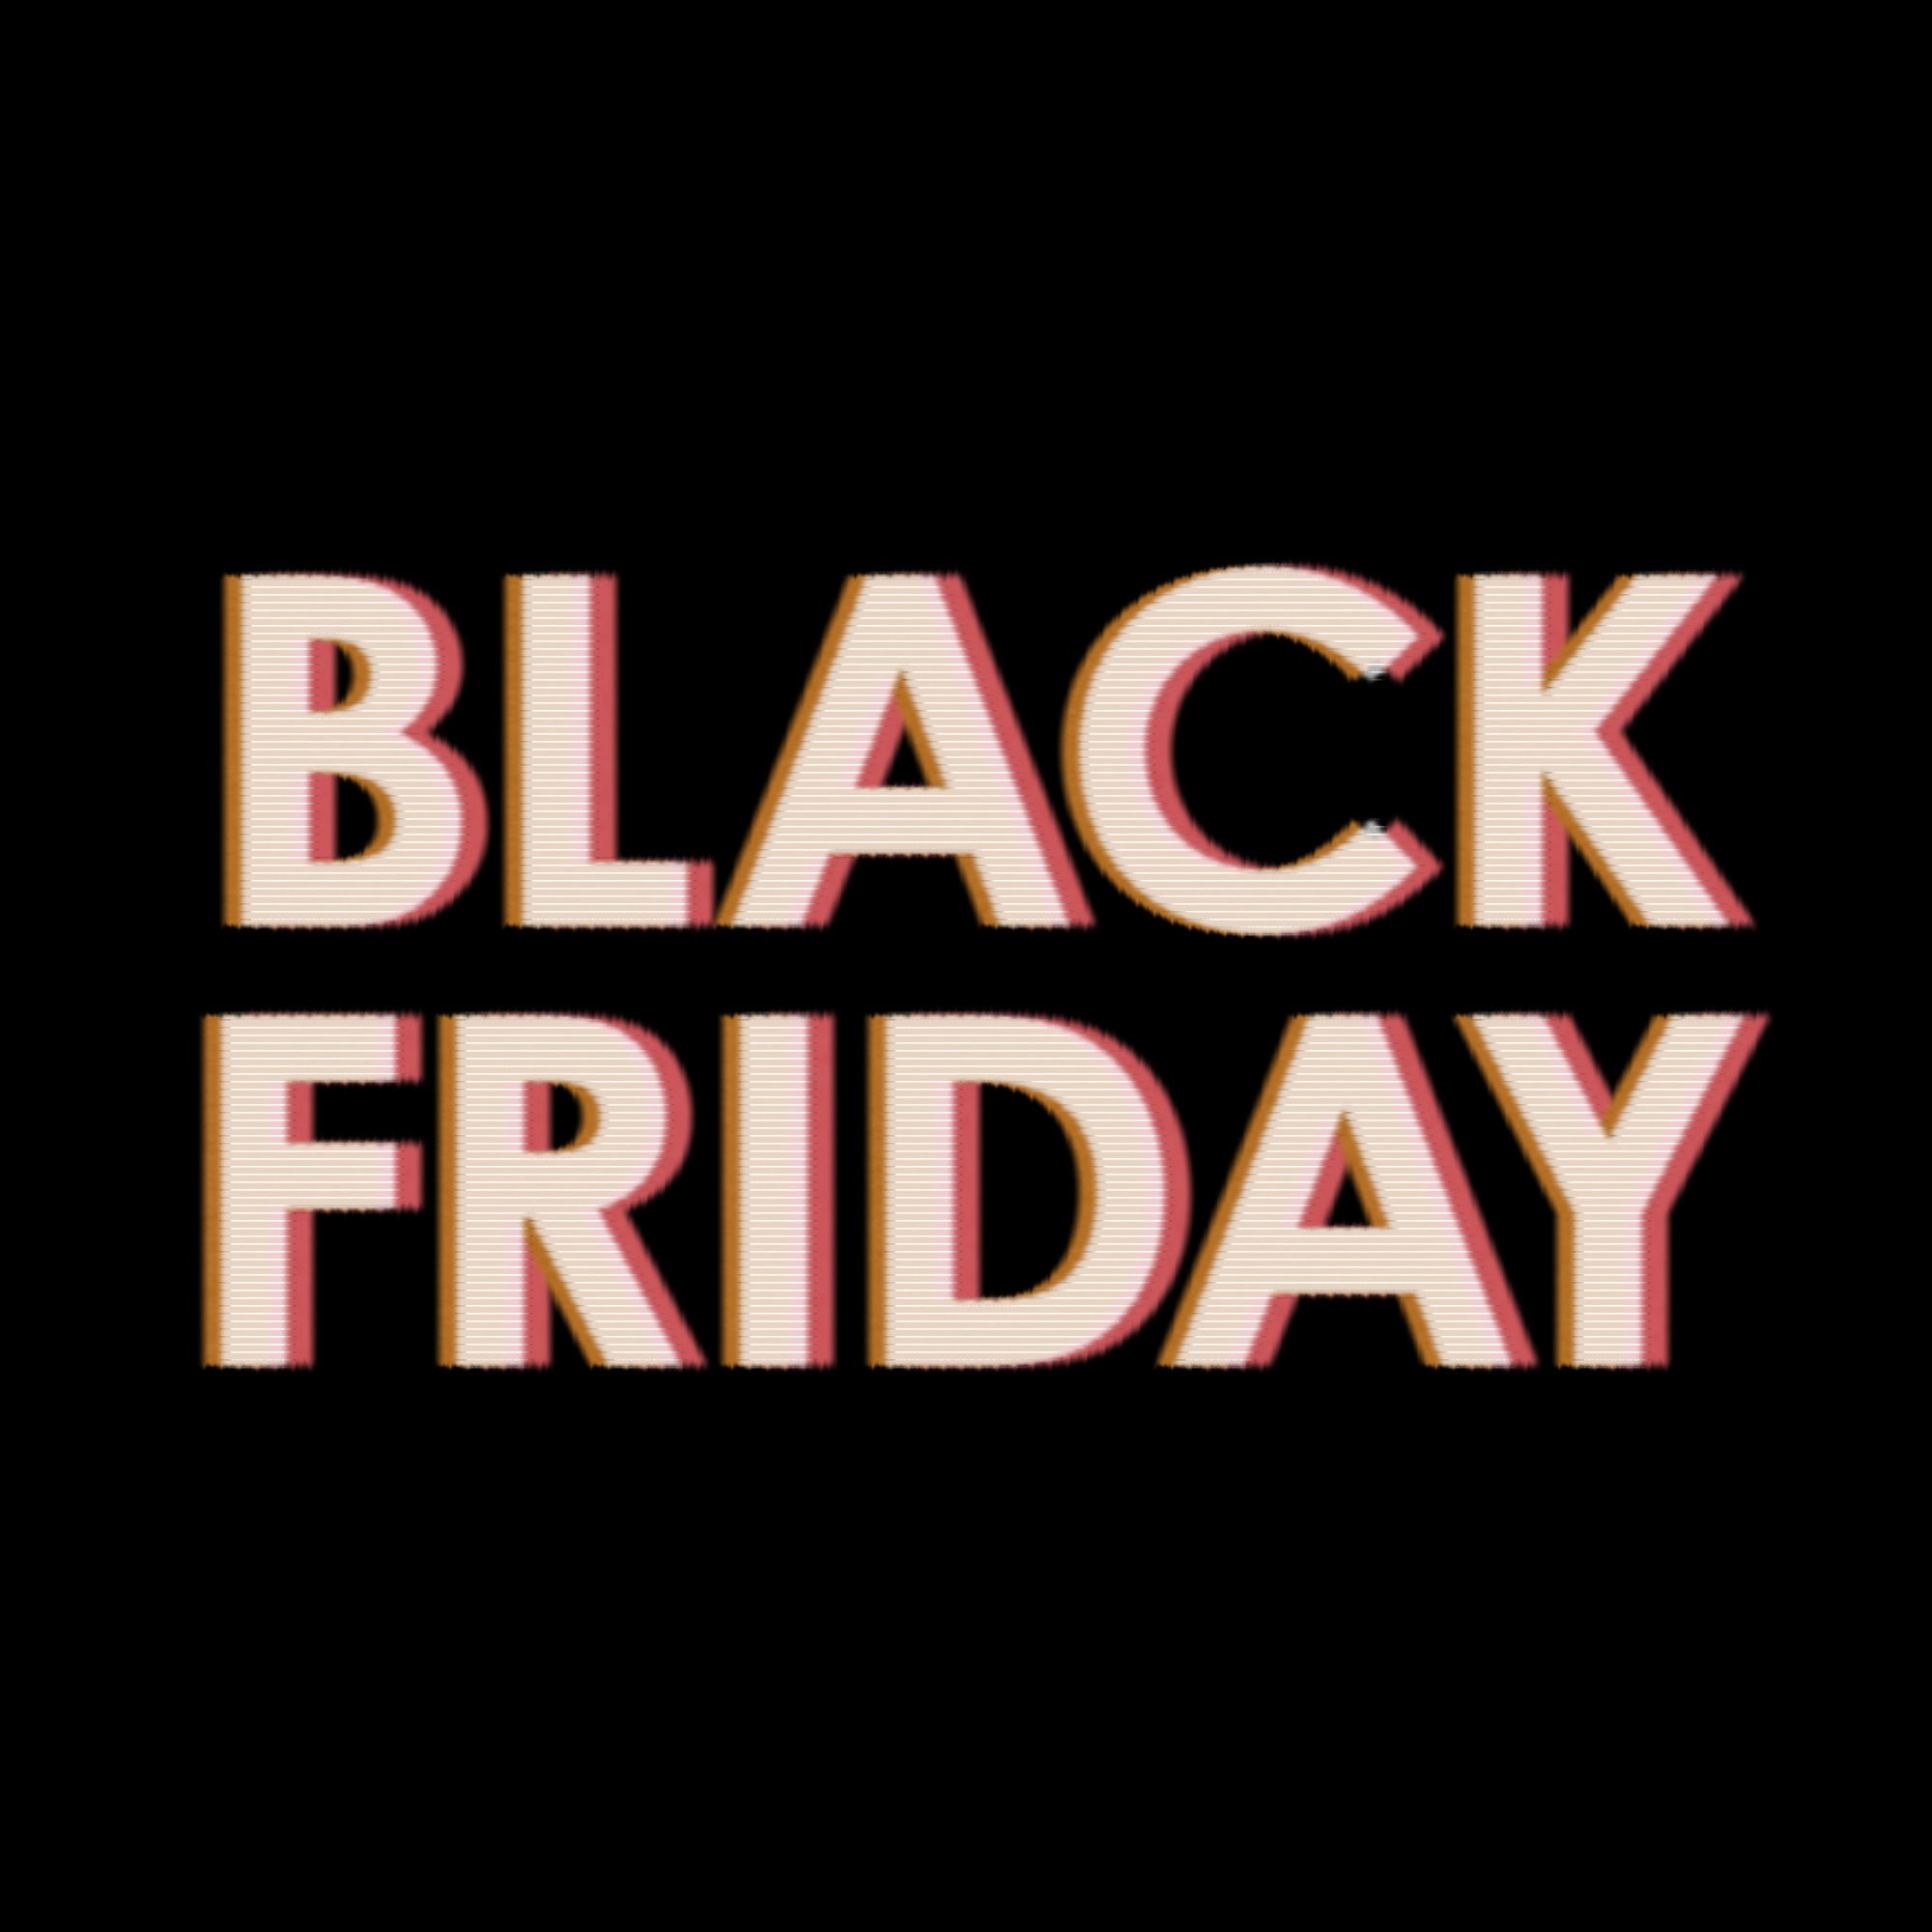 The Black Friday warm-up